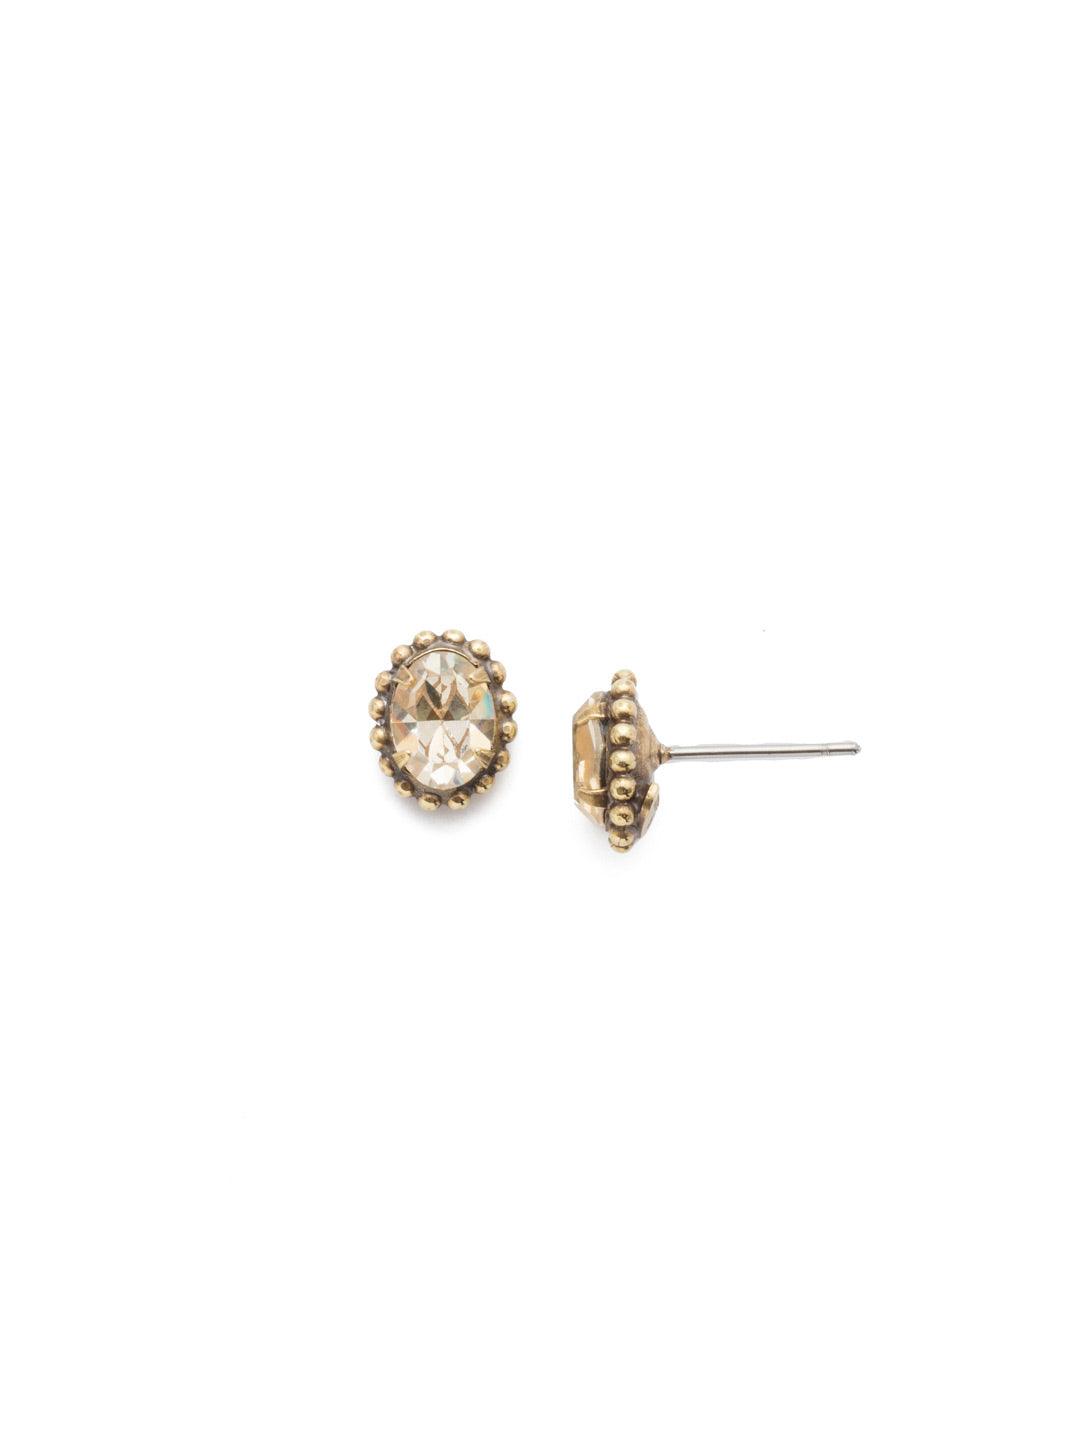 Maisie Stud Earrings - EEH11AGCCH - The perfect oval stud earring for day-to-night wear.